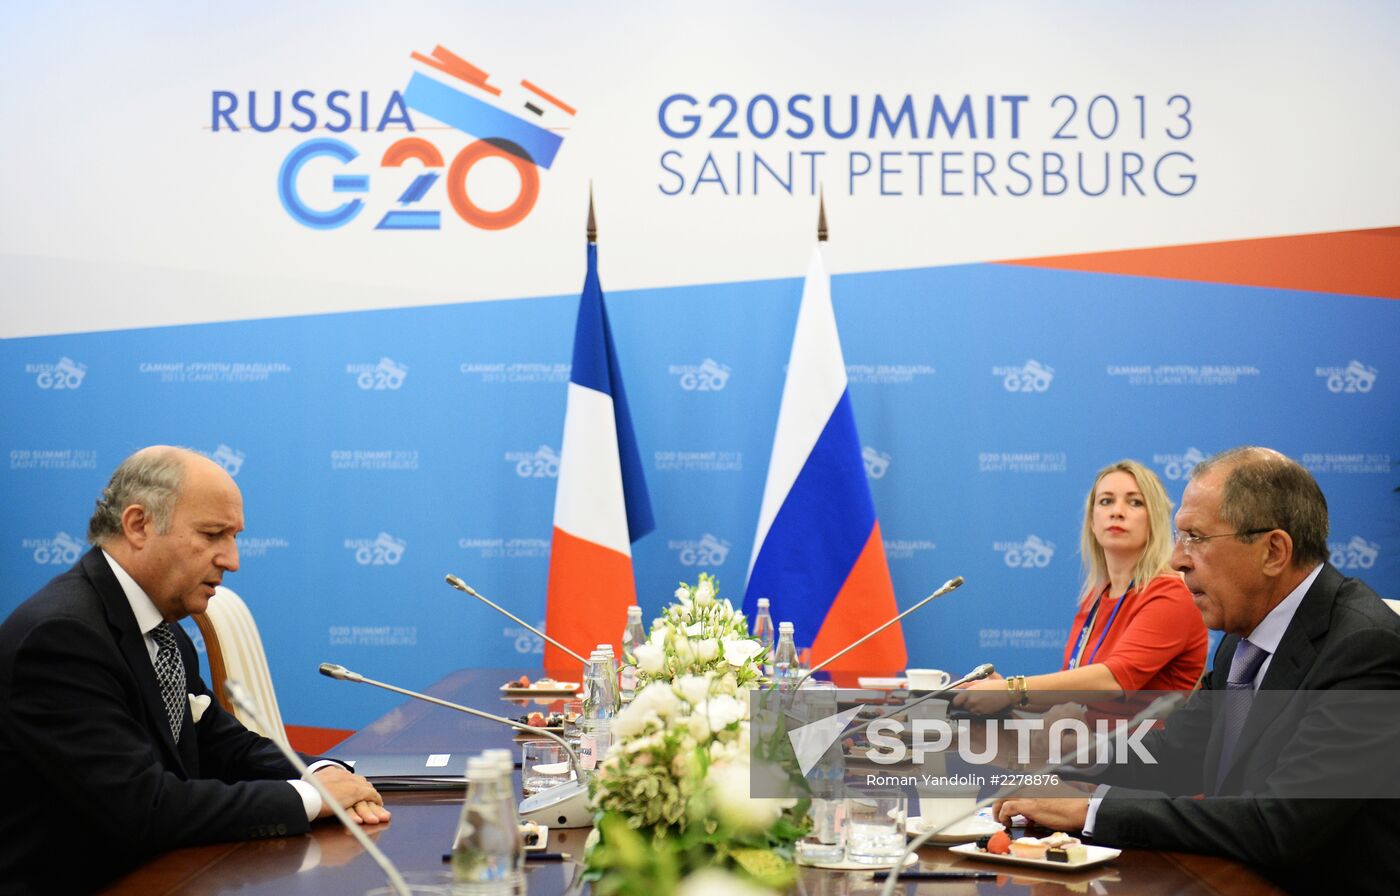 Sergei Lavrov meets with G20 foreign ministers